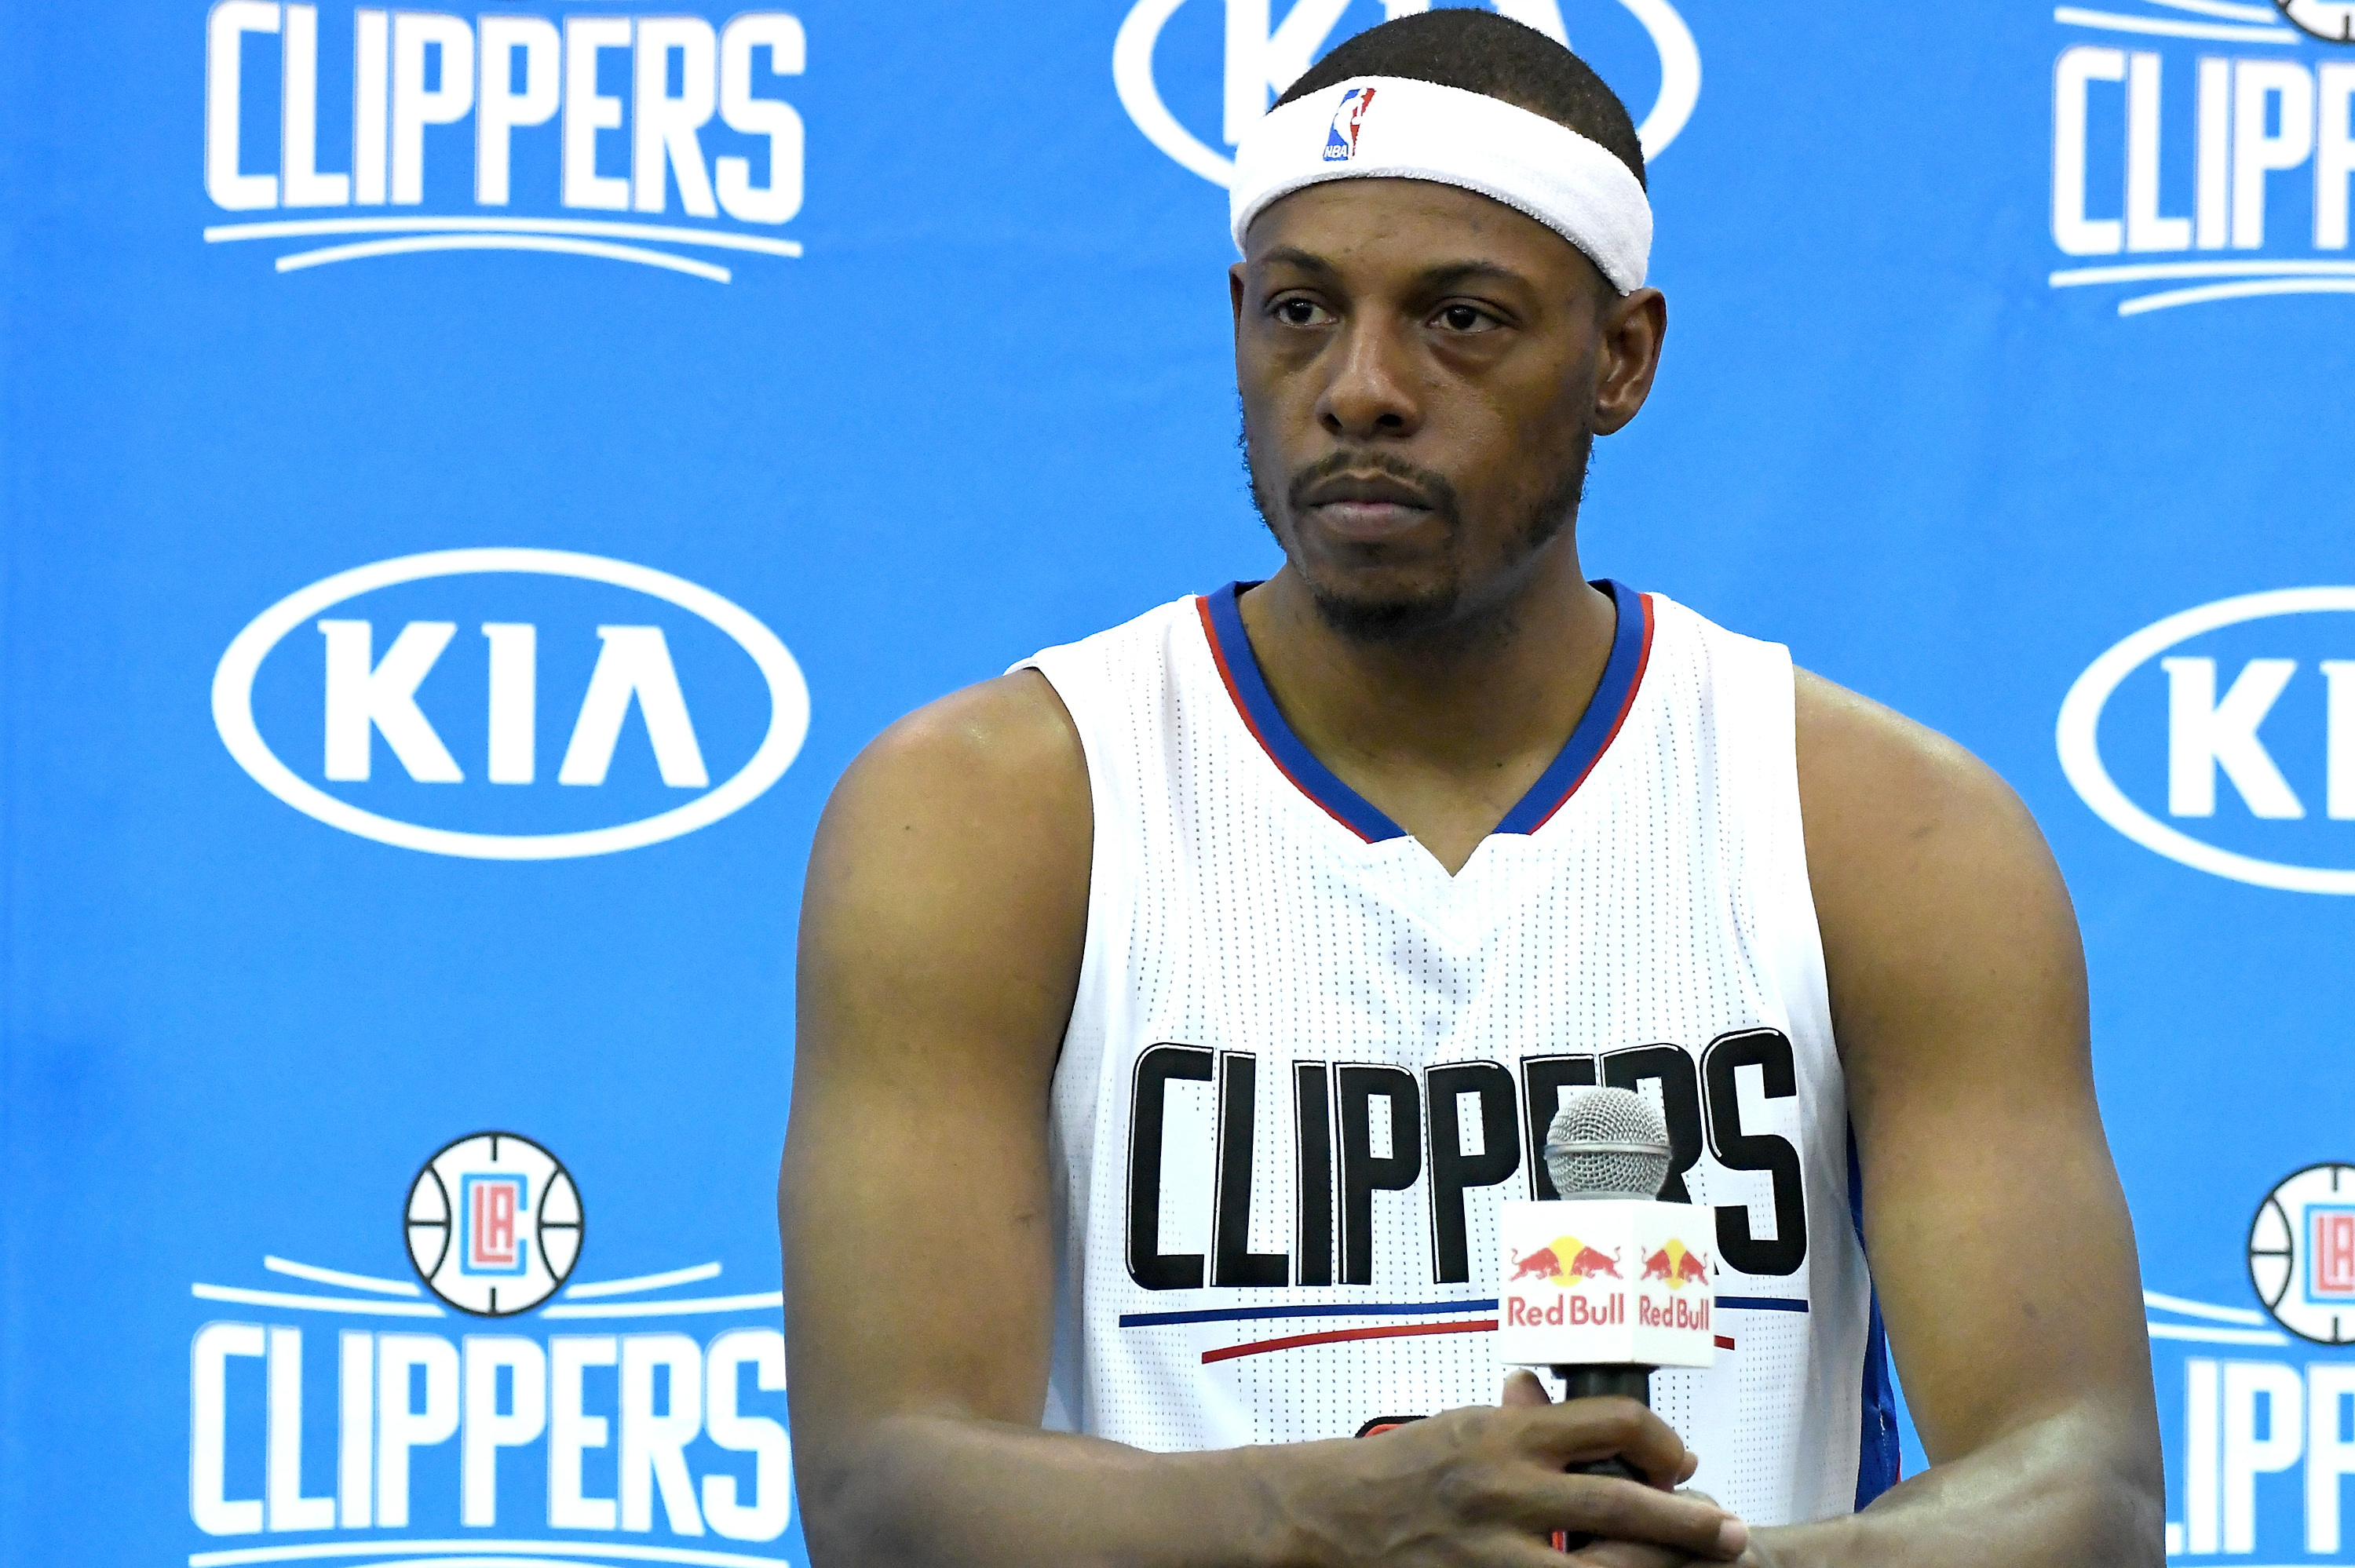 Clippers' Paul Pierce: 'This is it, my final season' - Los Angeles Times